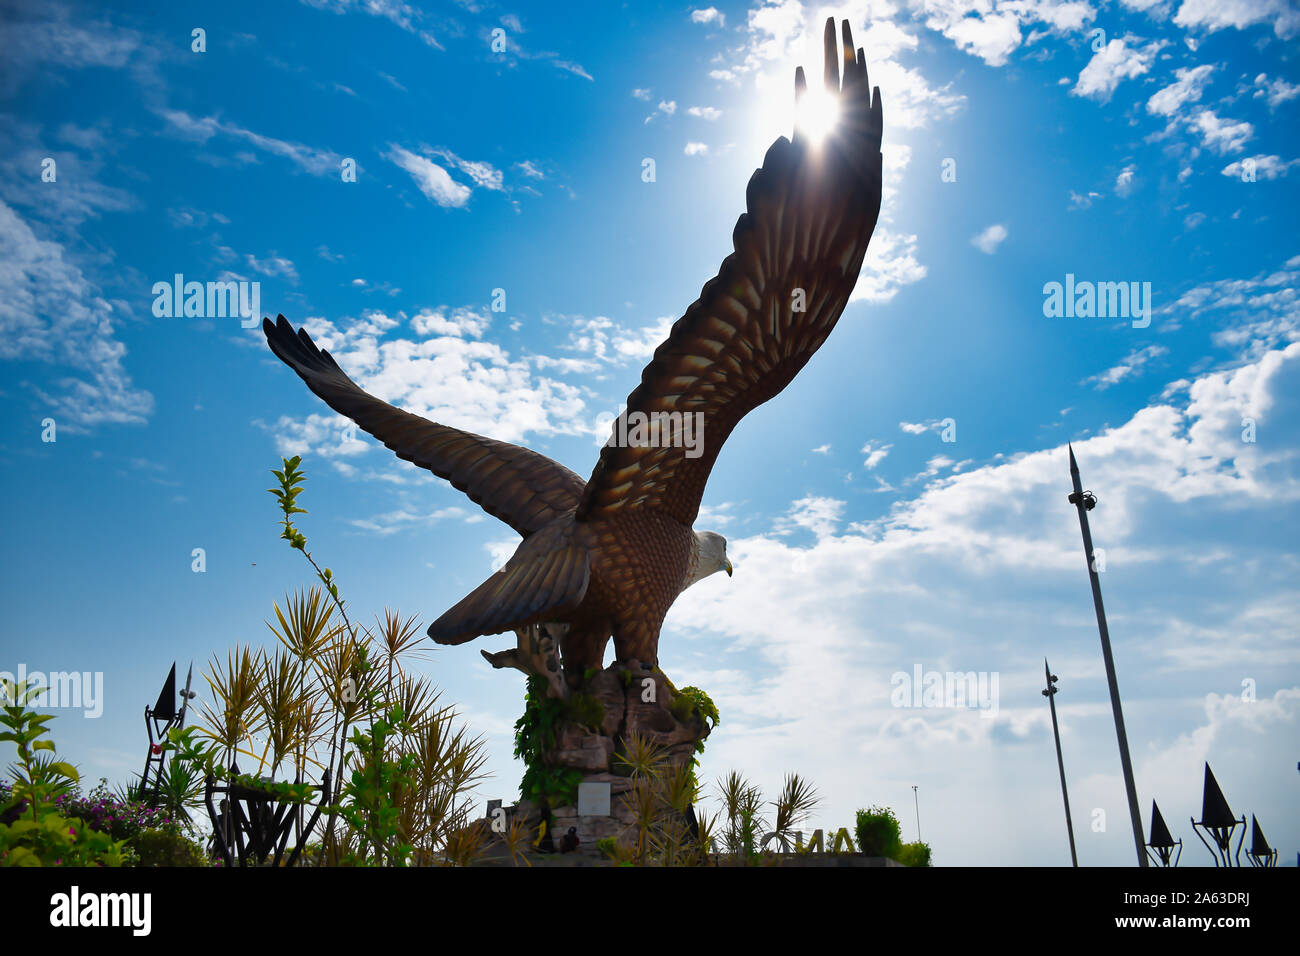 Langkawi, Malaysia 08.12.2019: Eagle Square or Dataran Lang is one of Langkawi’s best known man-made attractions, a large sculpture of a reddish brown Stock Photo